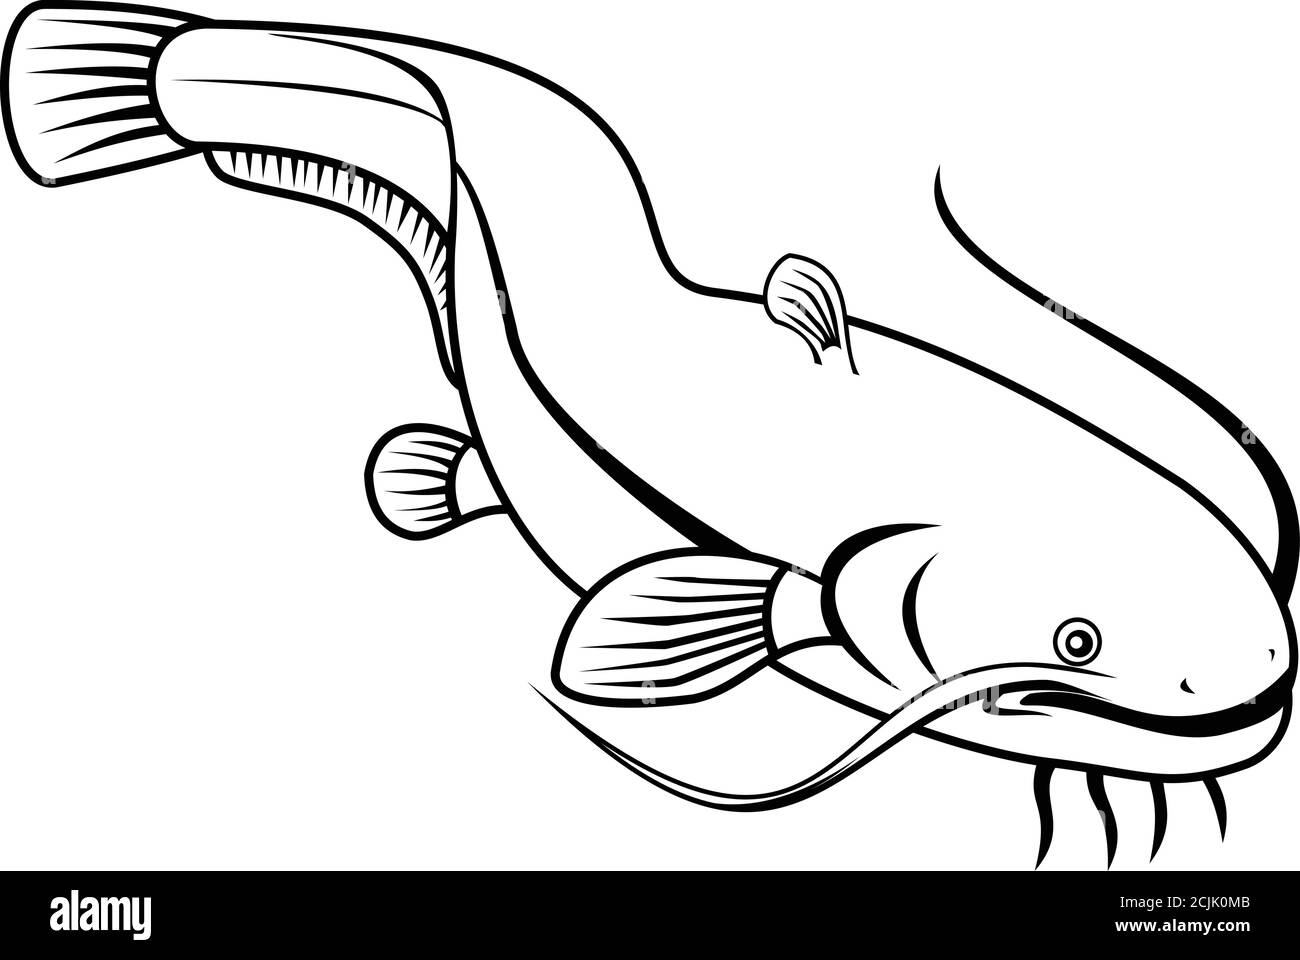 Retro style illustration of wels catfish also called sheatfish, a species of large catfish native to wide areas of central, southern and eastern Europ Stock Vector